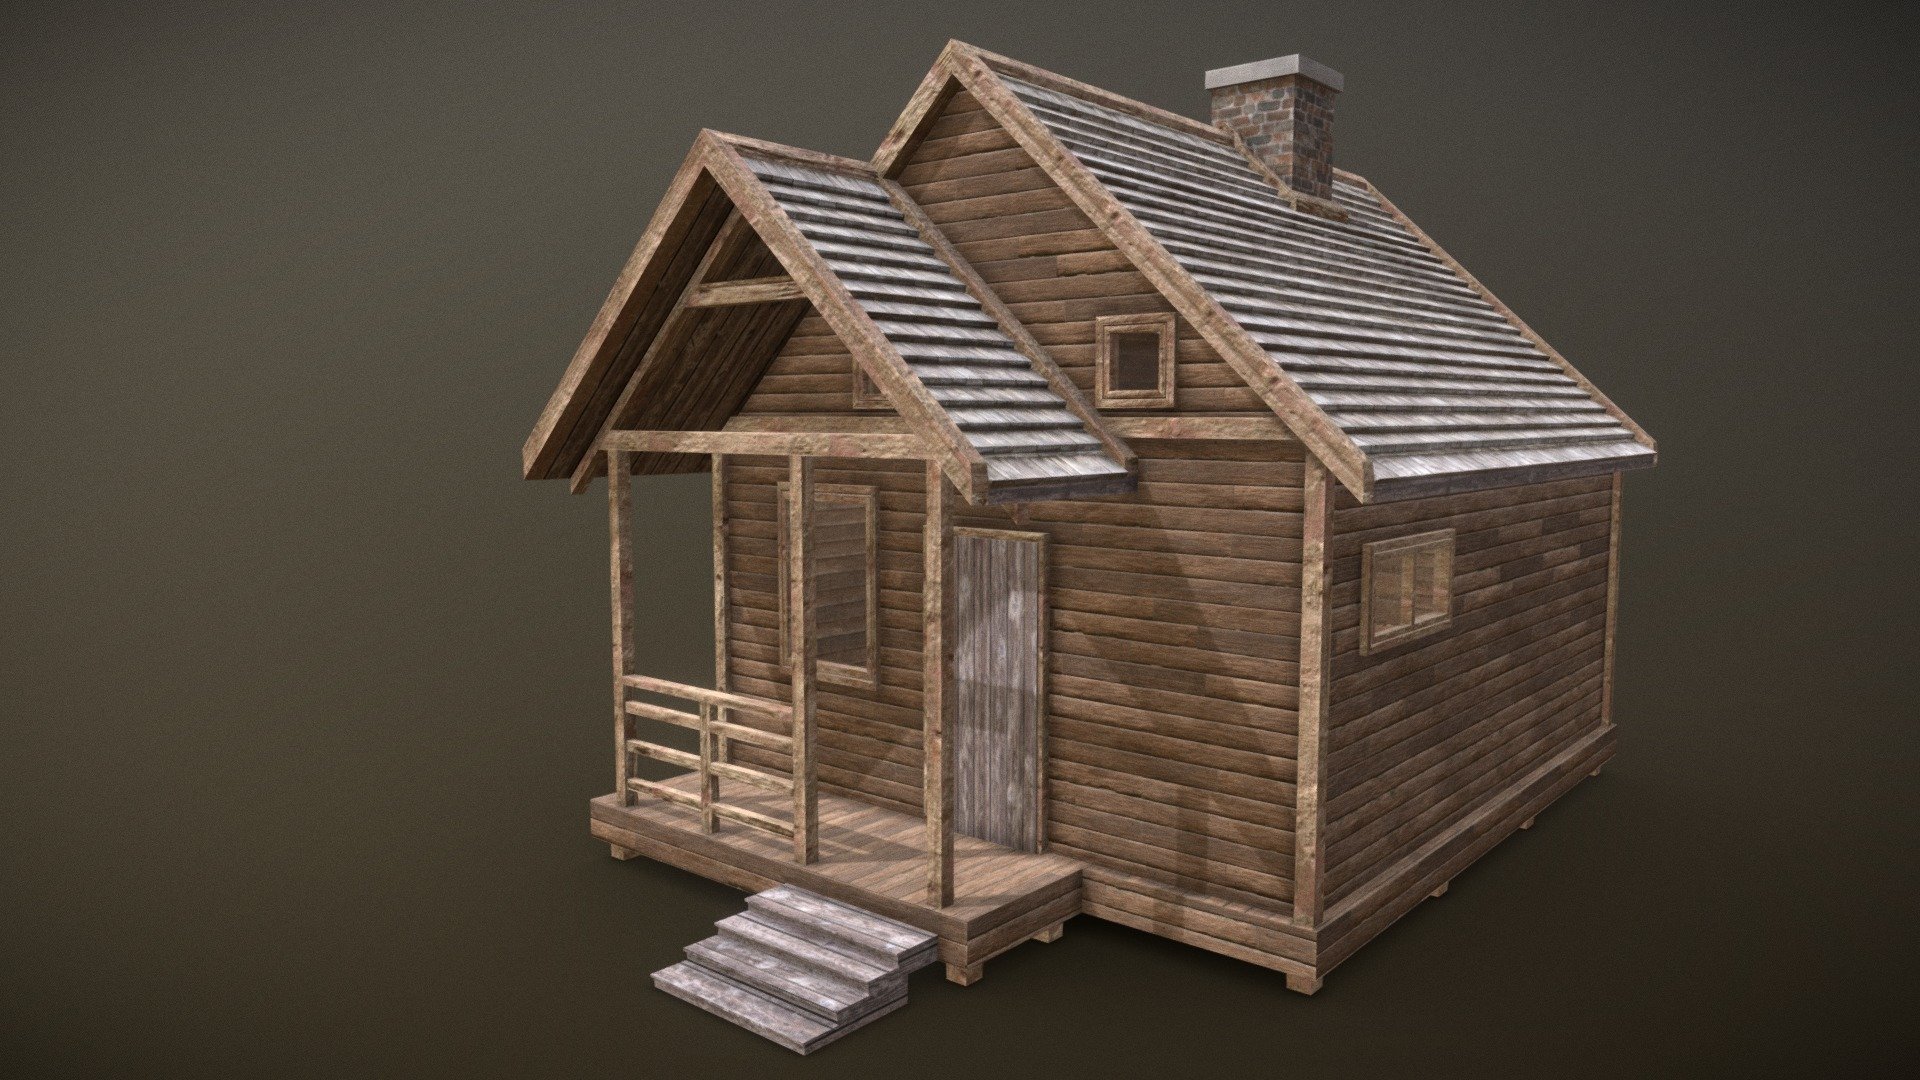 Wooden House House In The Woods Project Download Free D Model By Helindu B D B Sketchfab